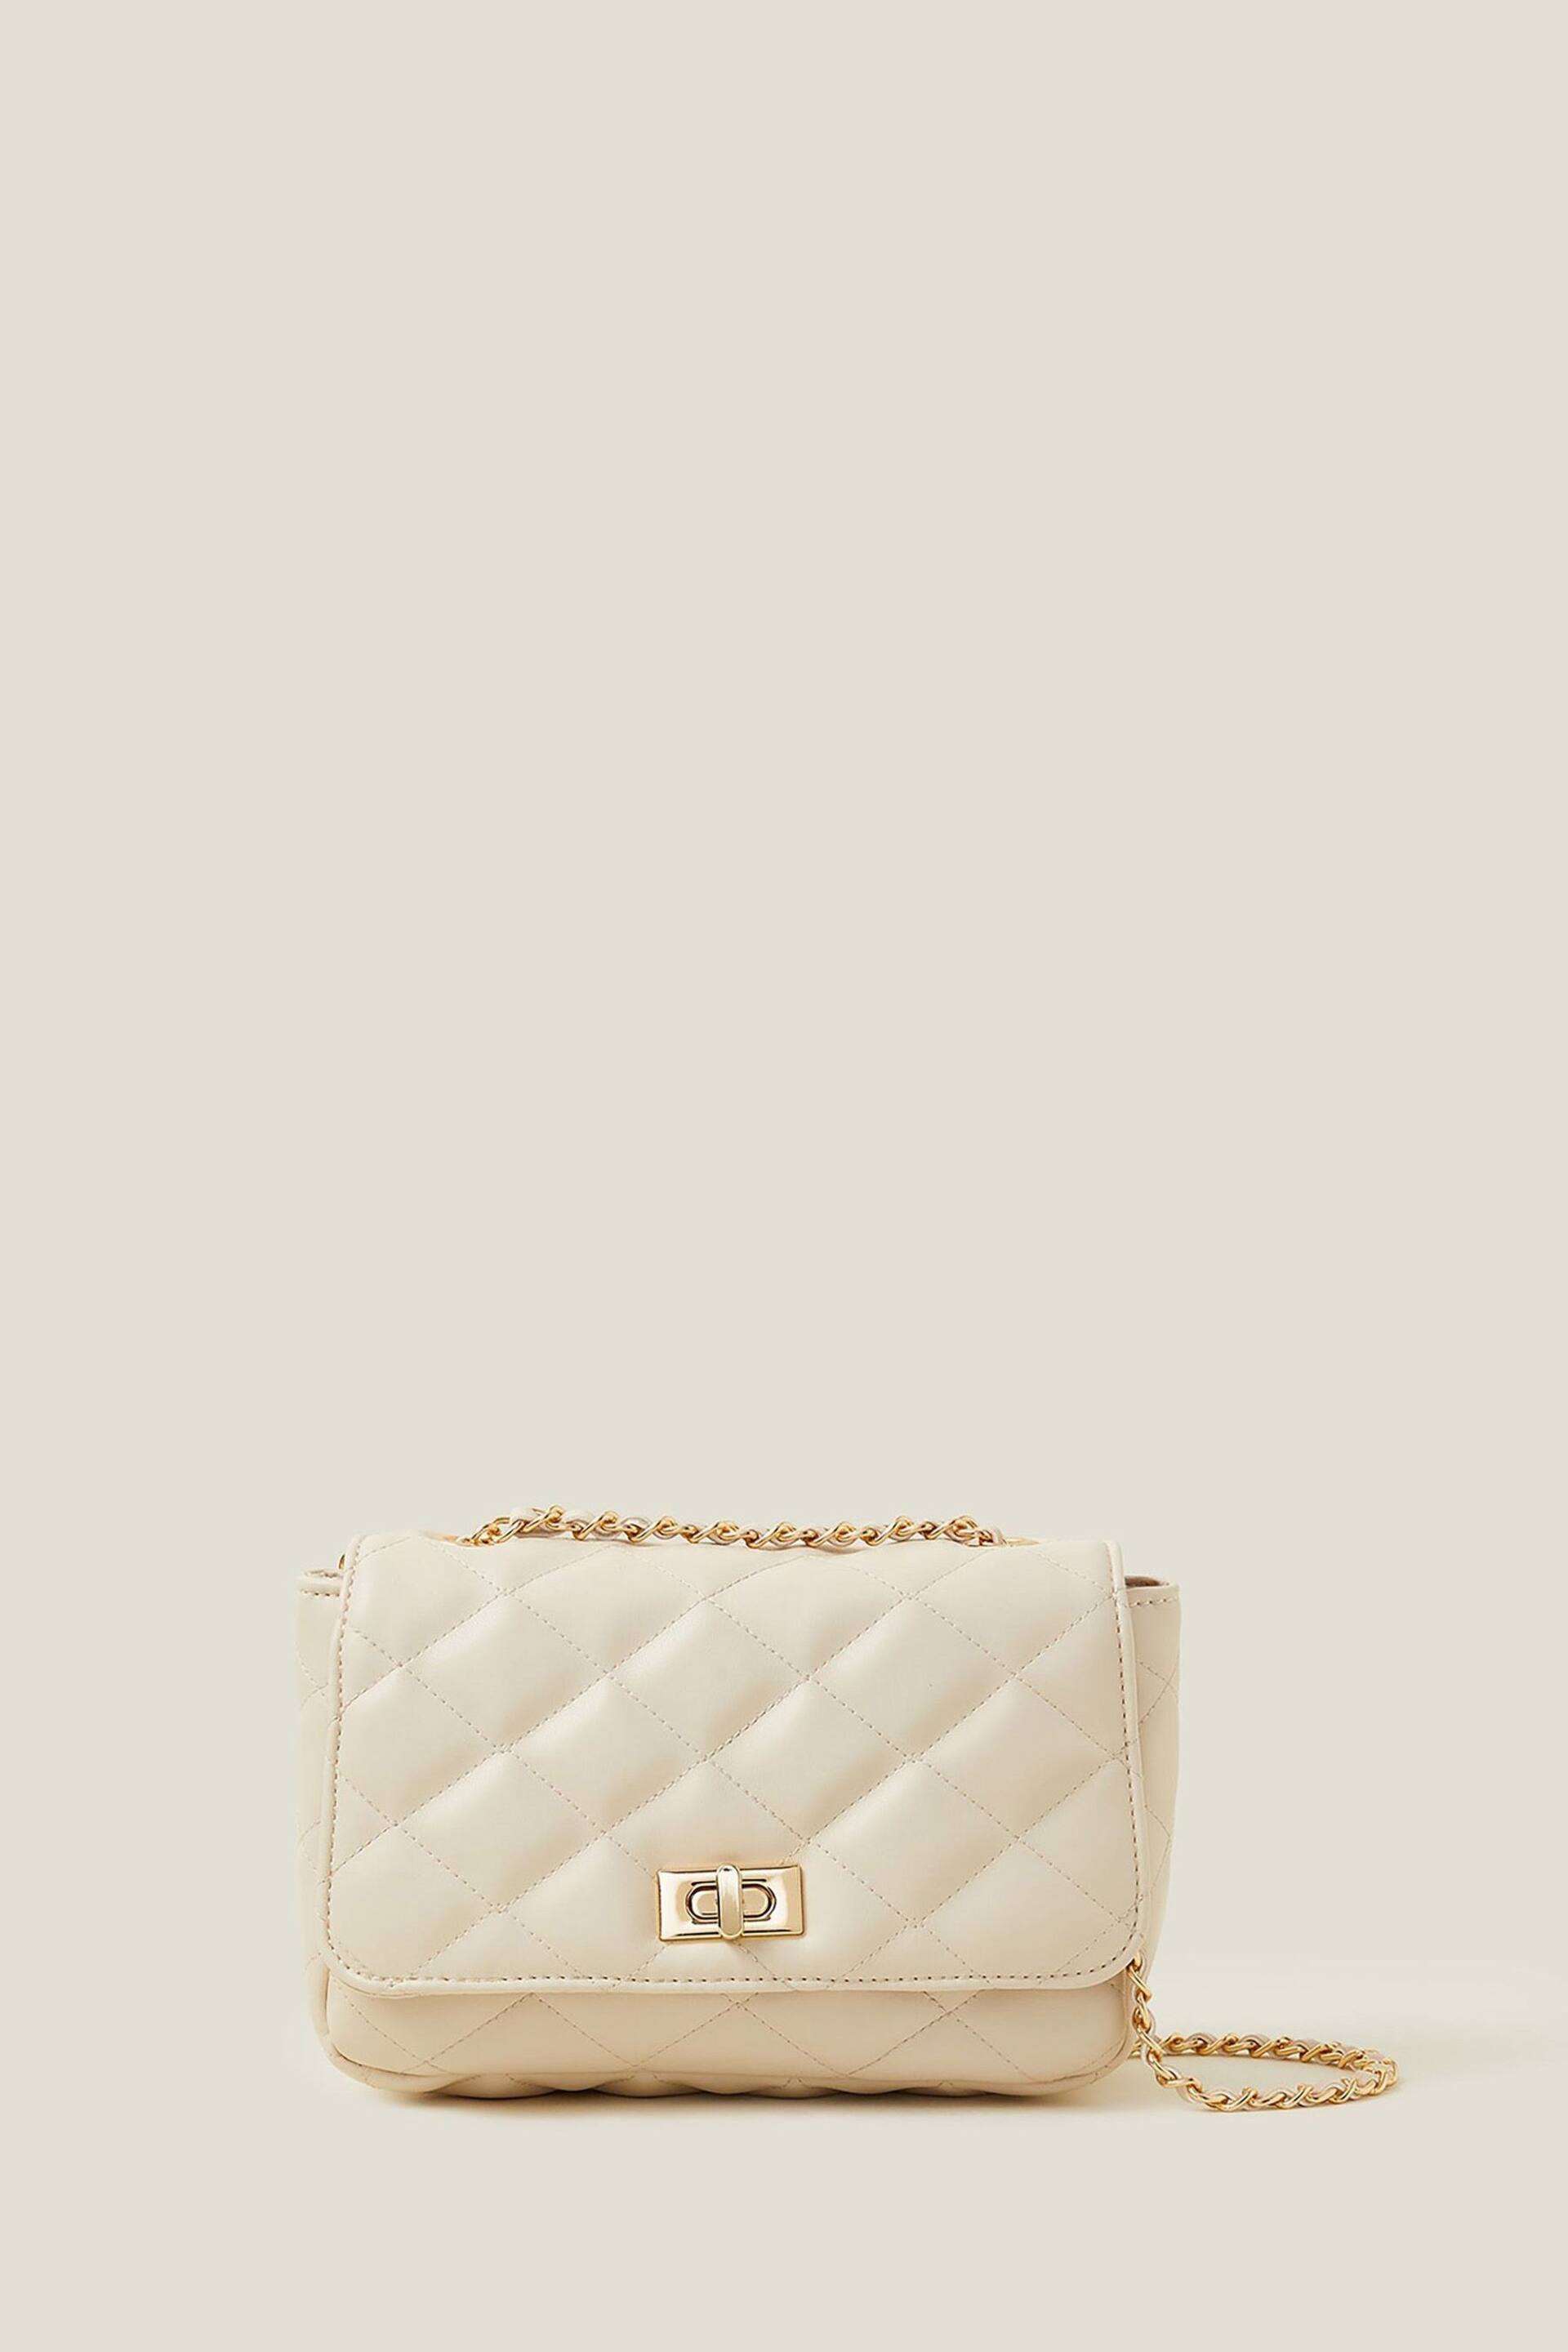 Accessorize Cream Quilted Cross-Body Bag - Image 2 of 4